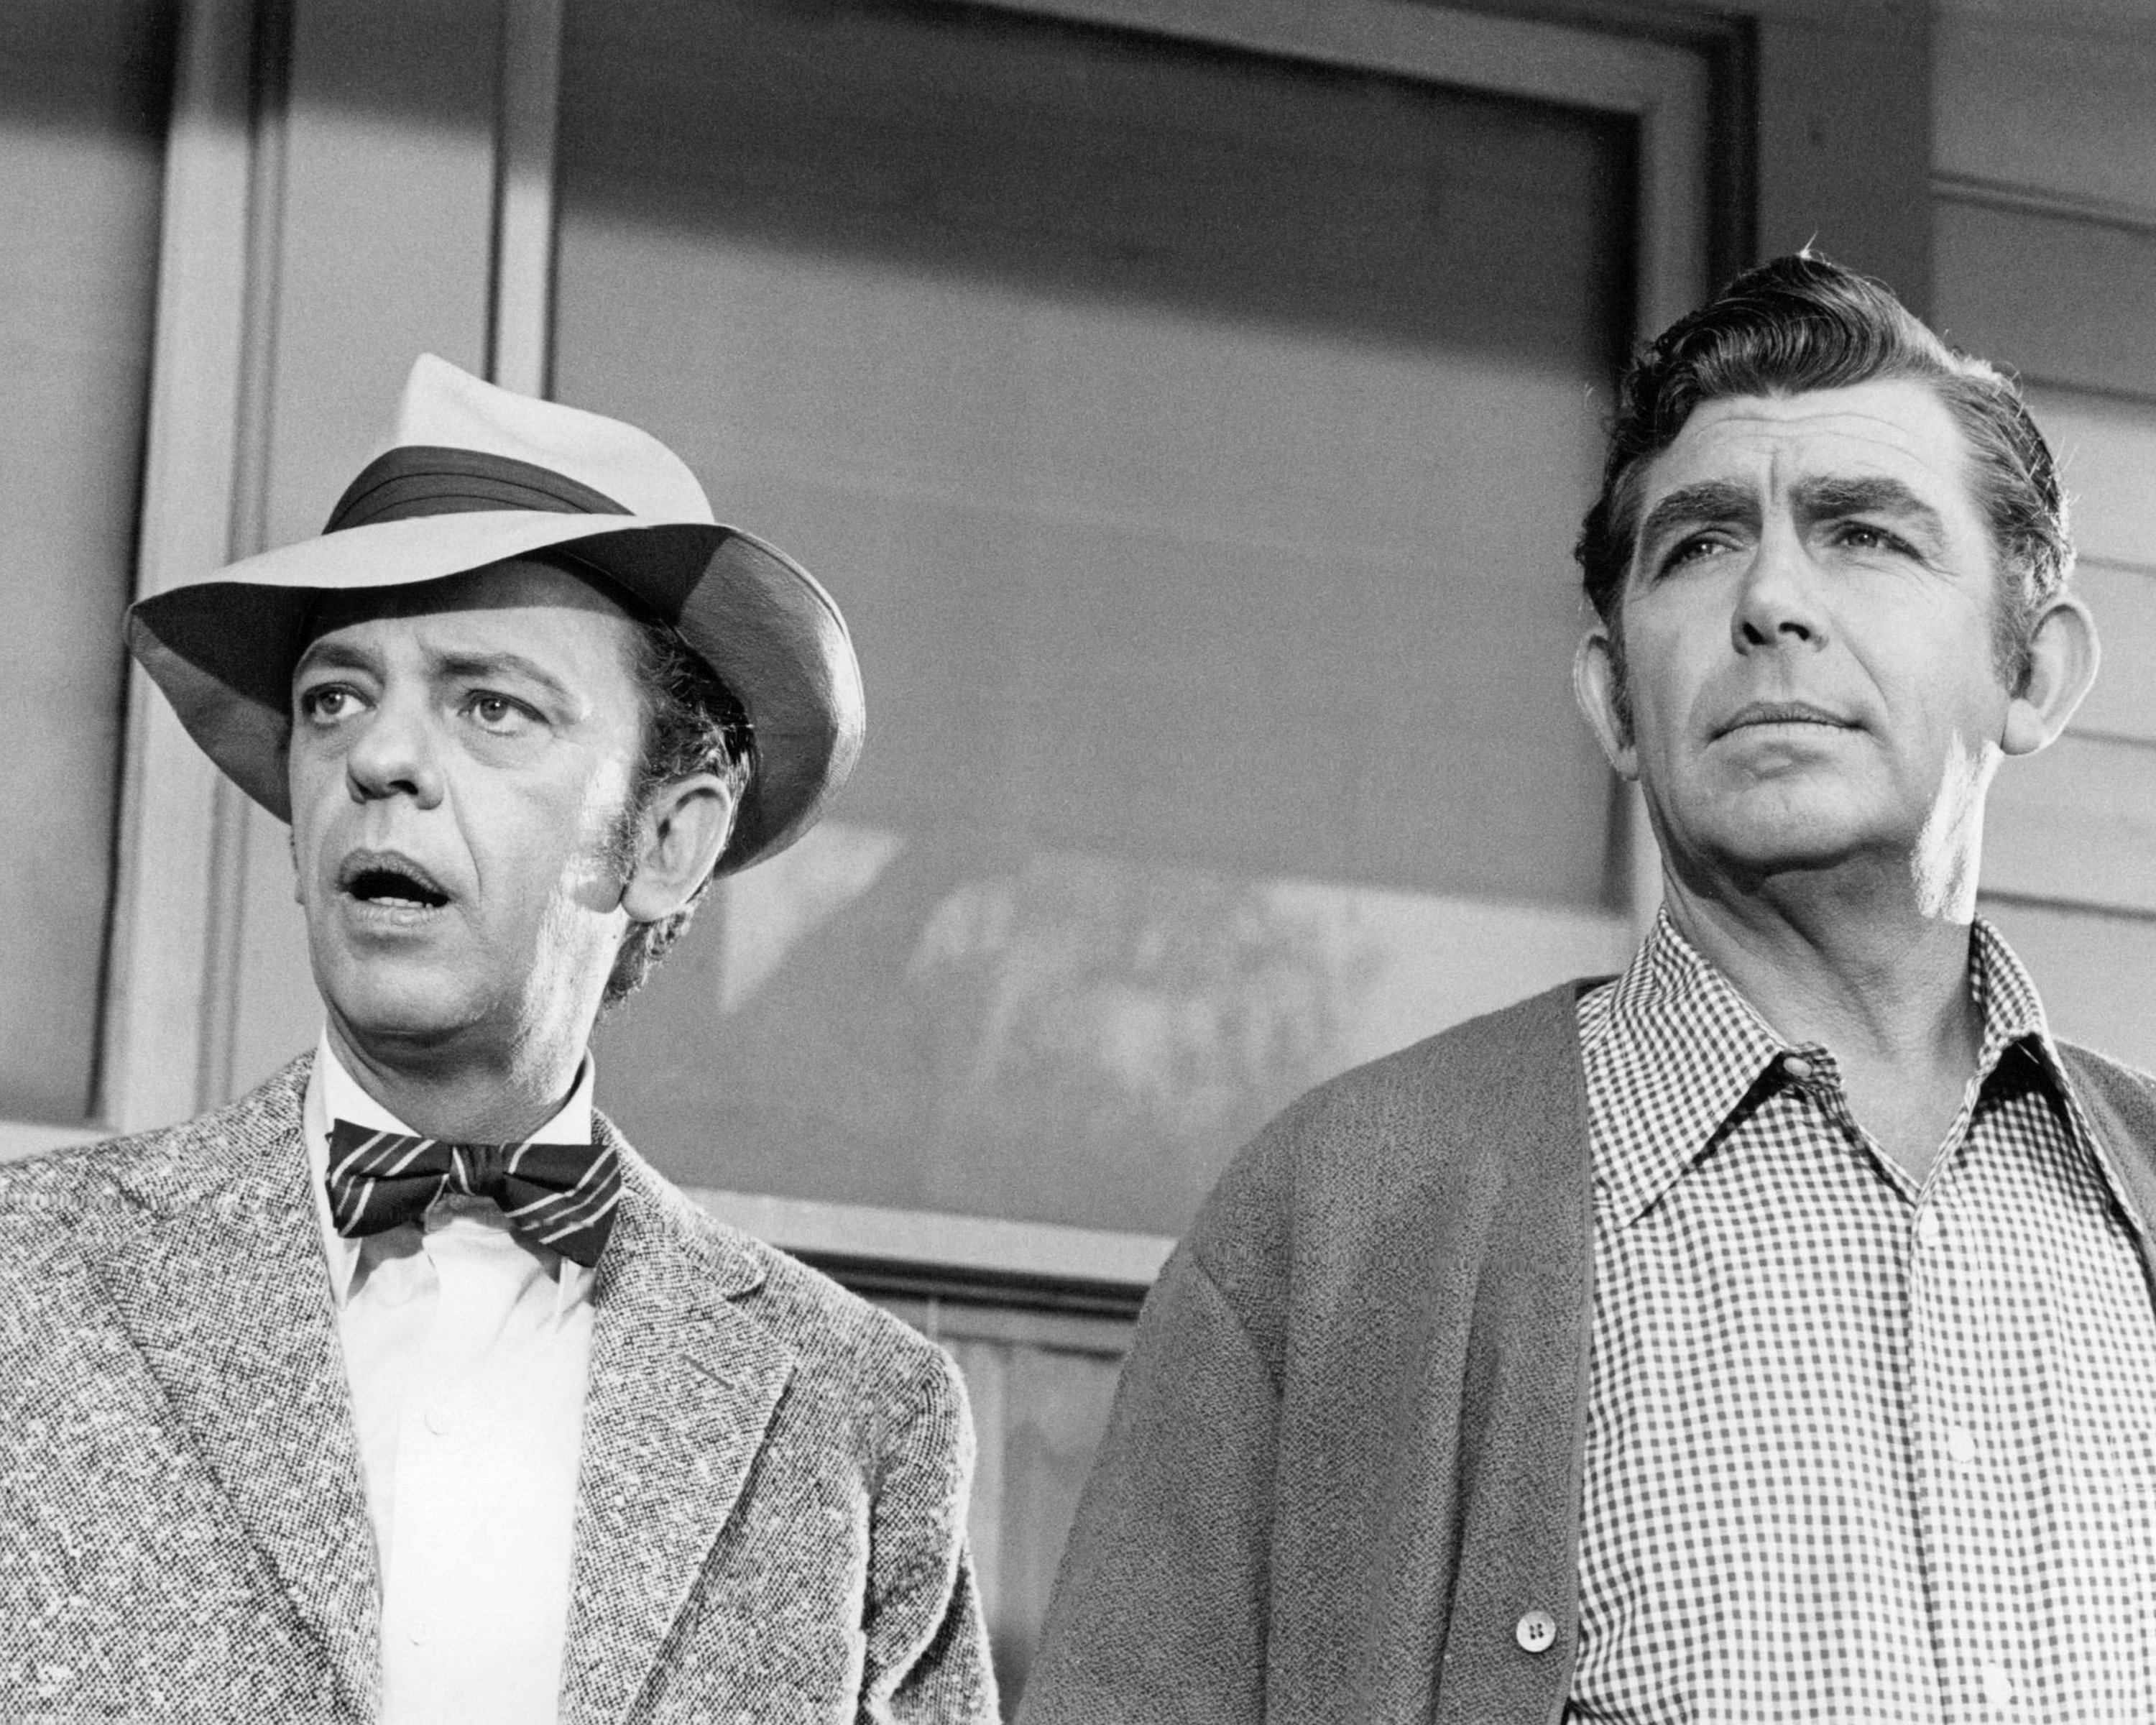 Left to right: 'The Andy Griffith Show' actors Don Knotts and Andy Griffith